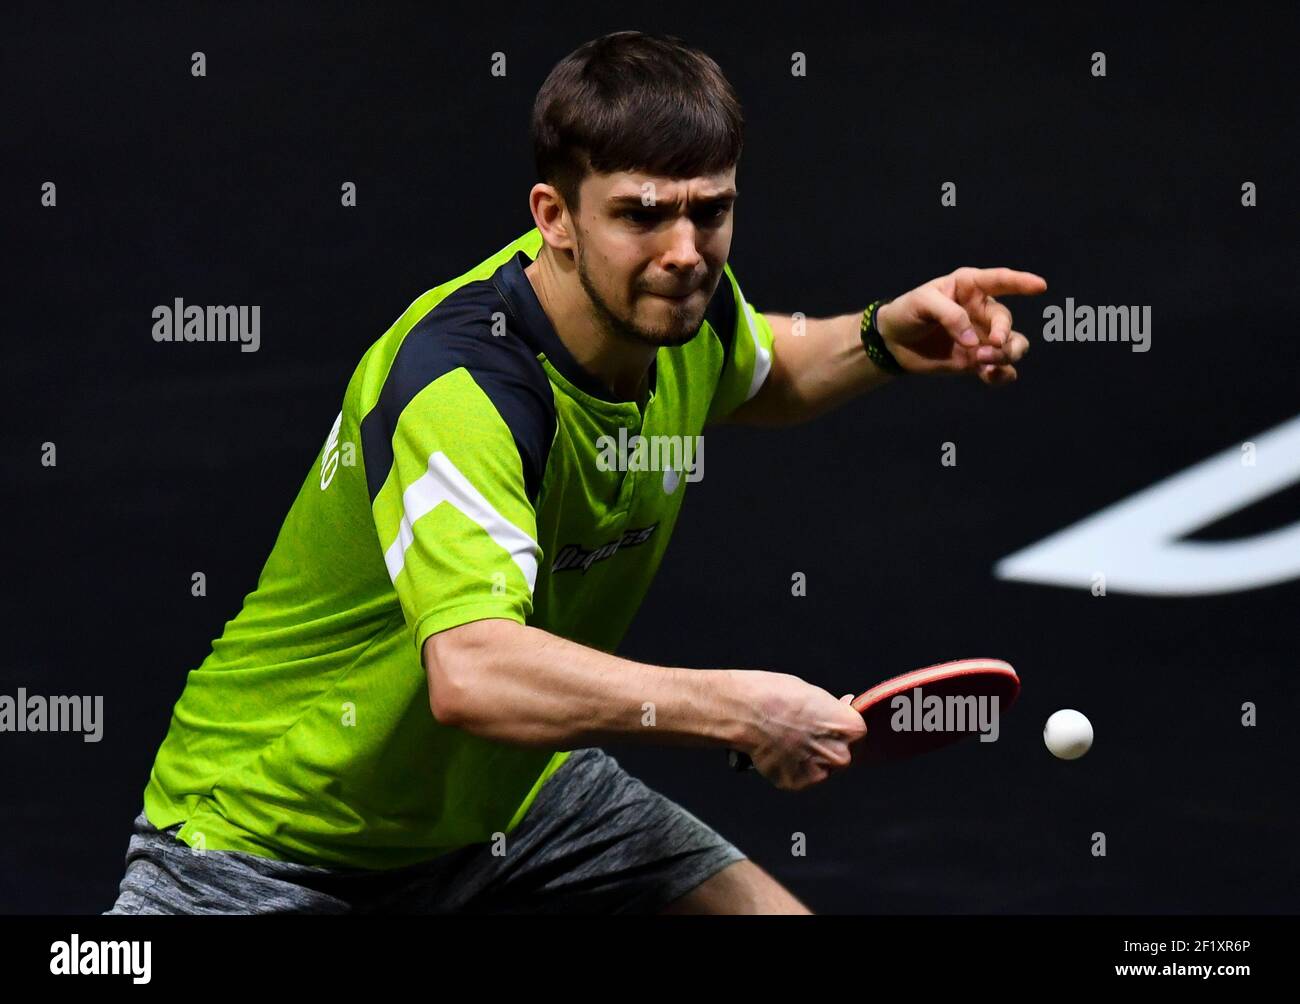 Doha, Qatar. 9th Mar, 2021. Kirill Gerassimenko of Kazakistan competes during the men's singles round of 32 match against Jeoung Youngsik of South Korea at WTT Star Contender Doha 2021 in Doha, Qatar, on March 9, 2021. Credit: Nikku/Xinhua/Alamy Live News Stock Photo